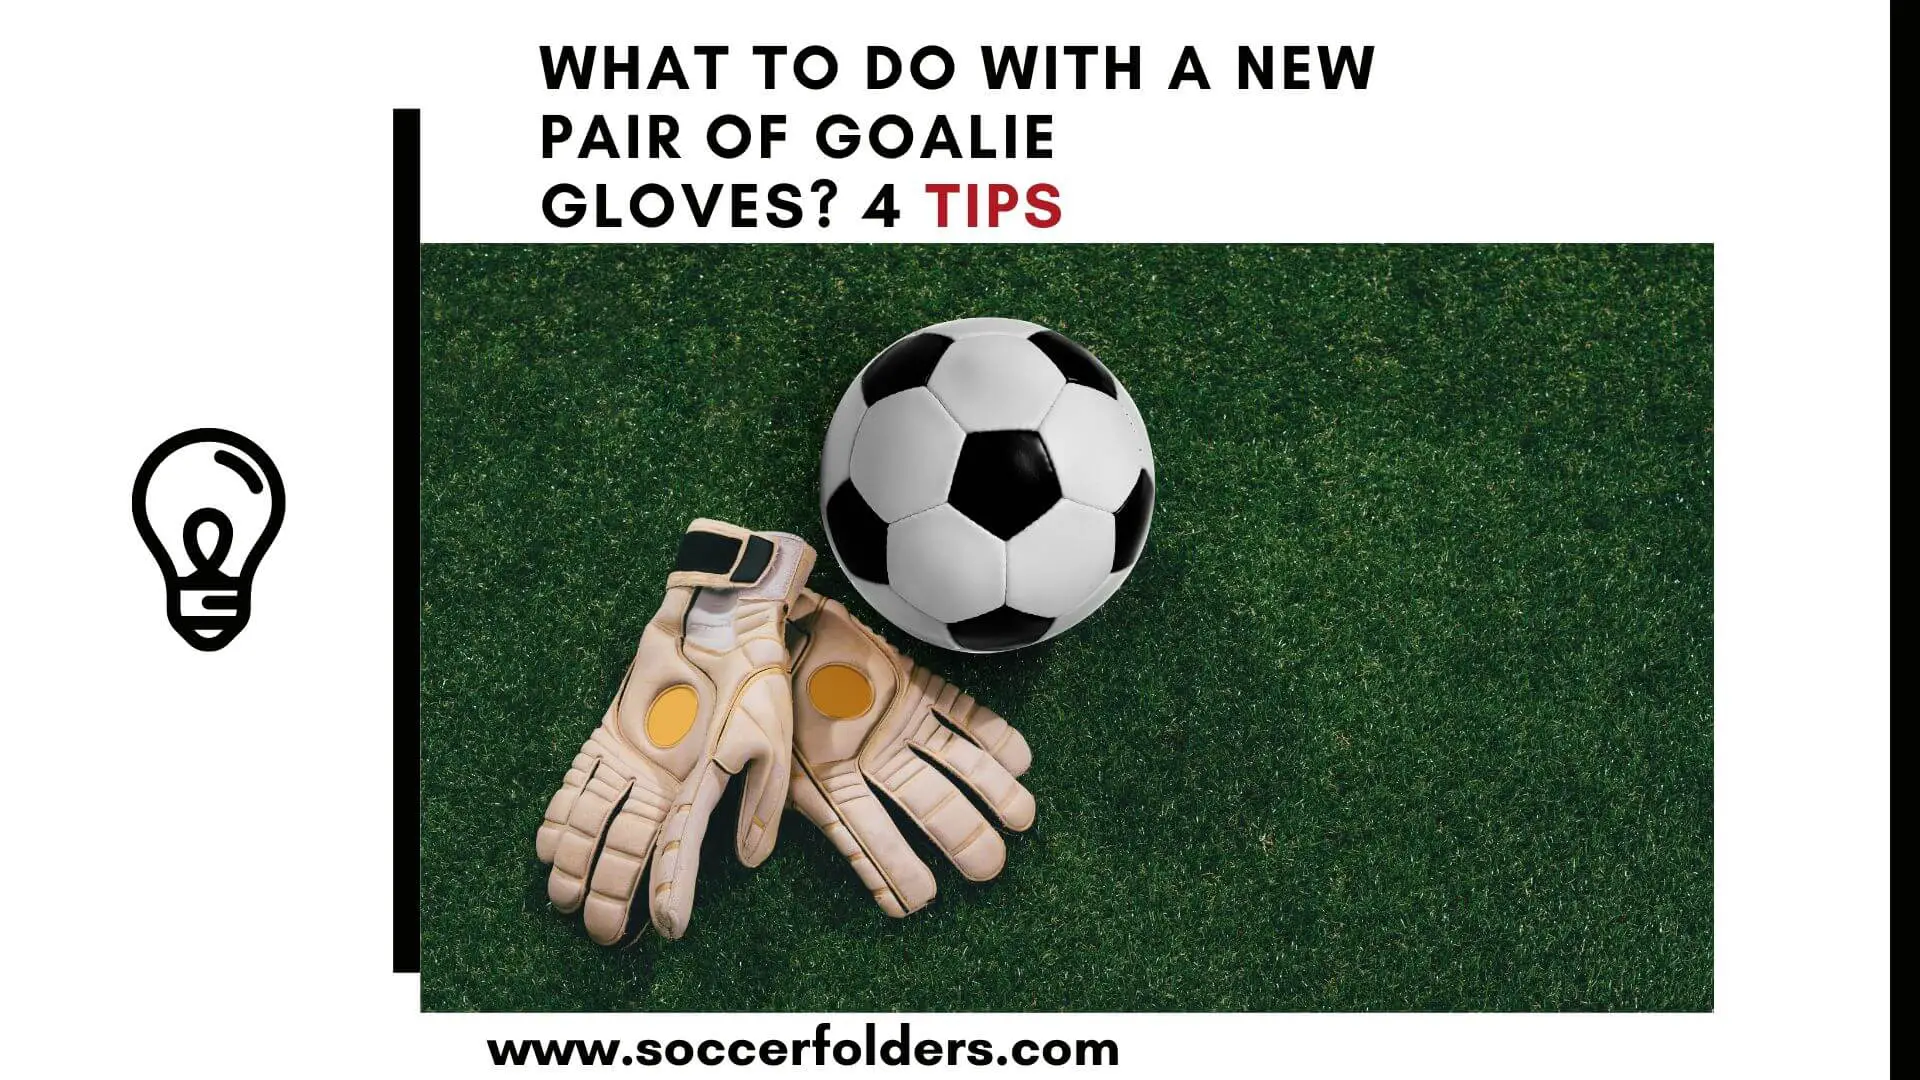 What To Do With A New Pair Of Goalie Gloves - Featured Image